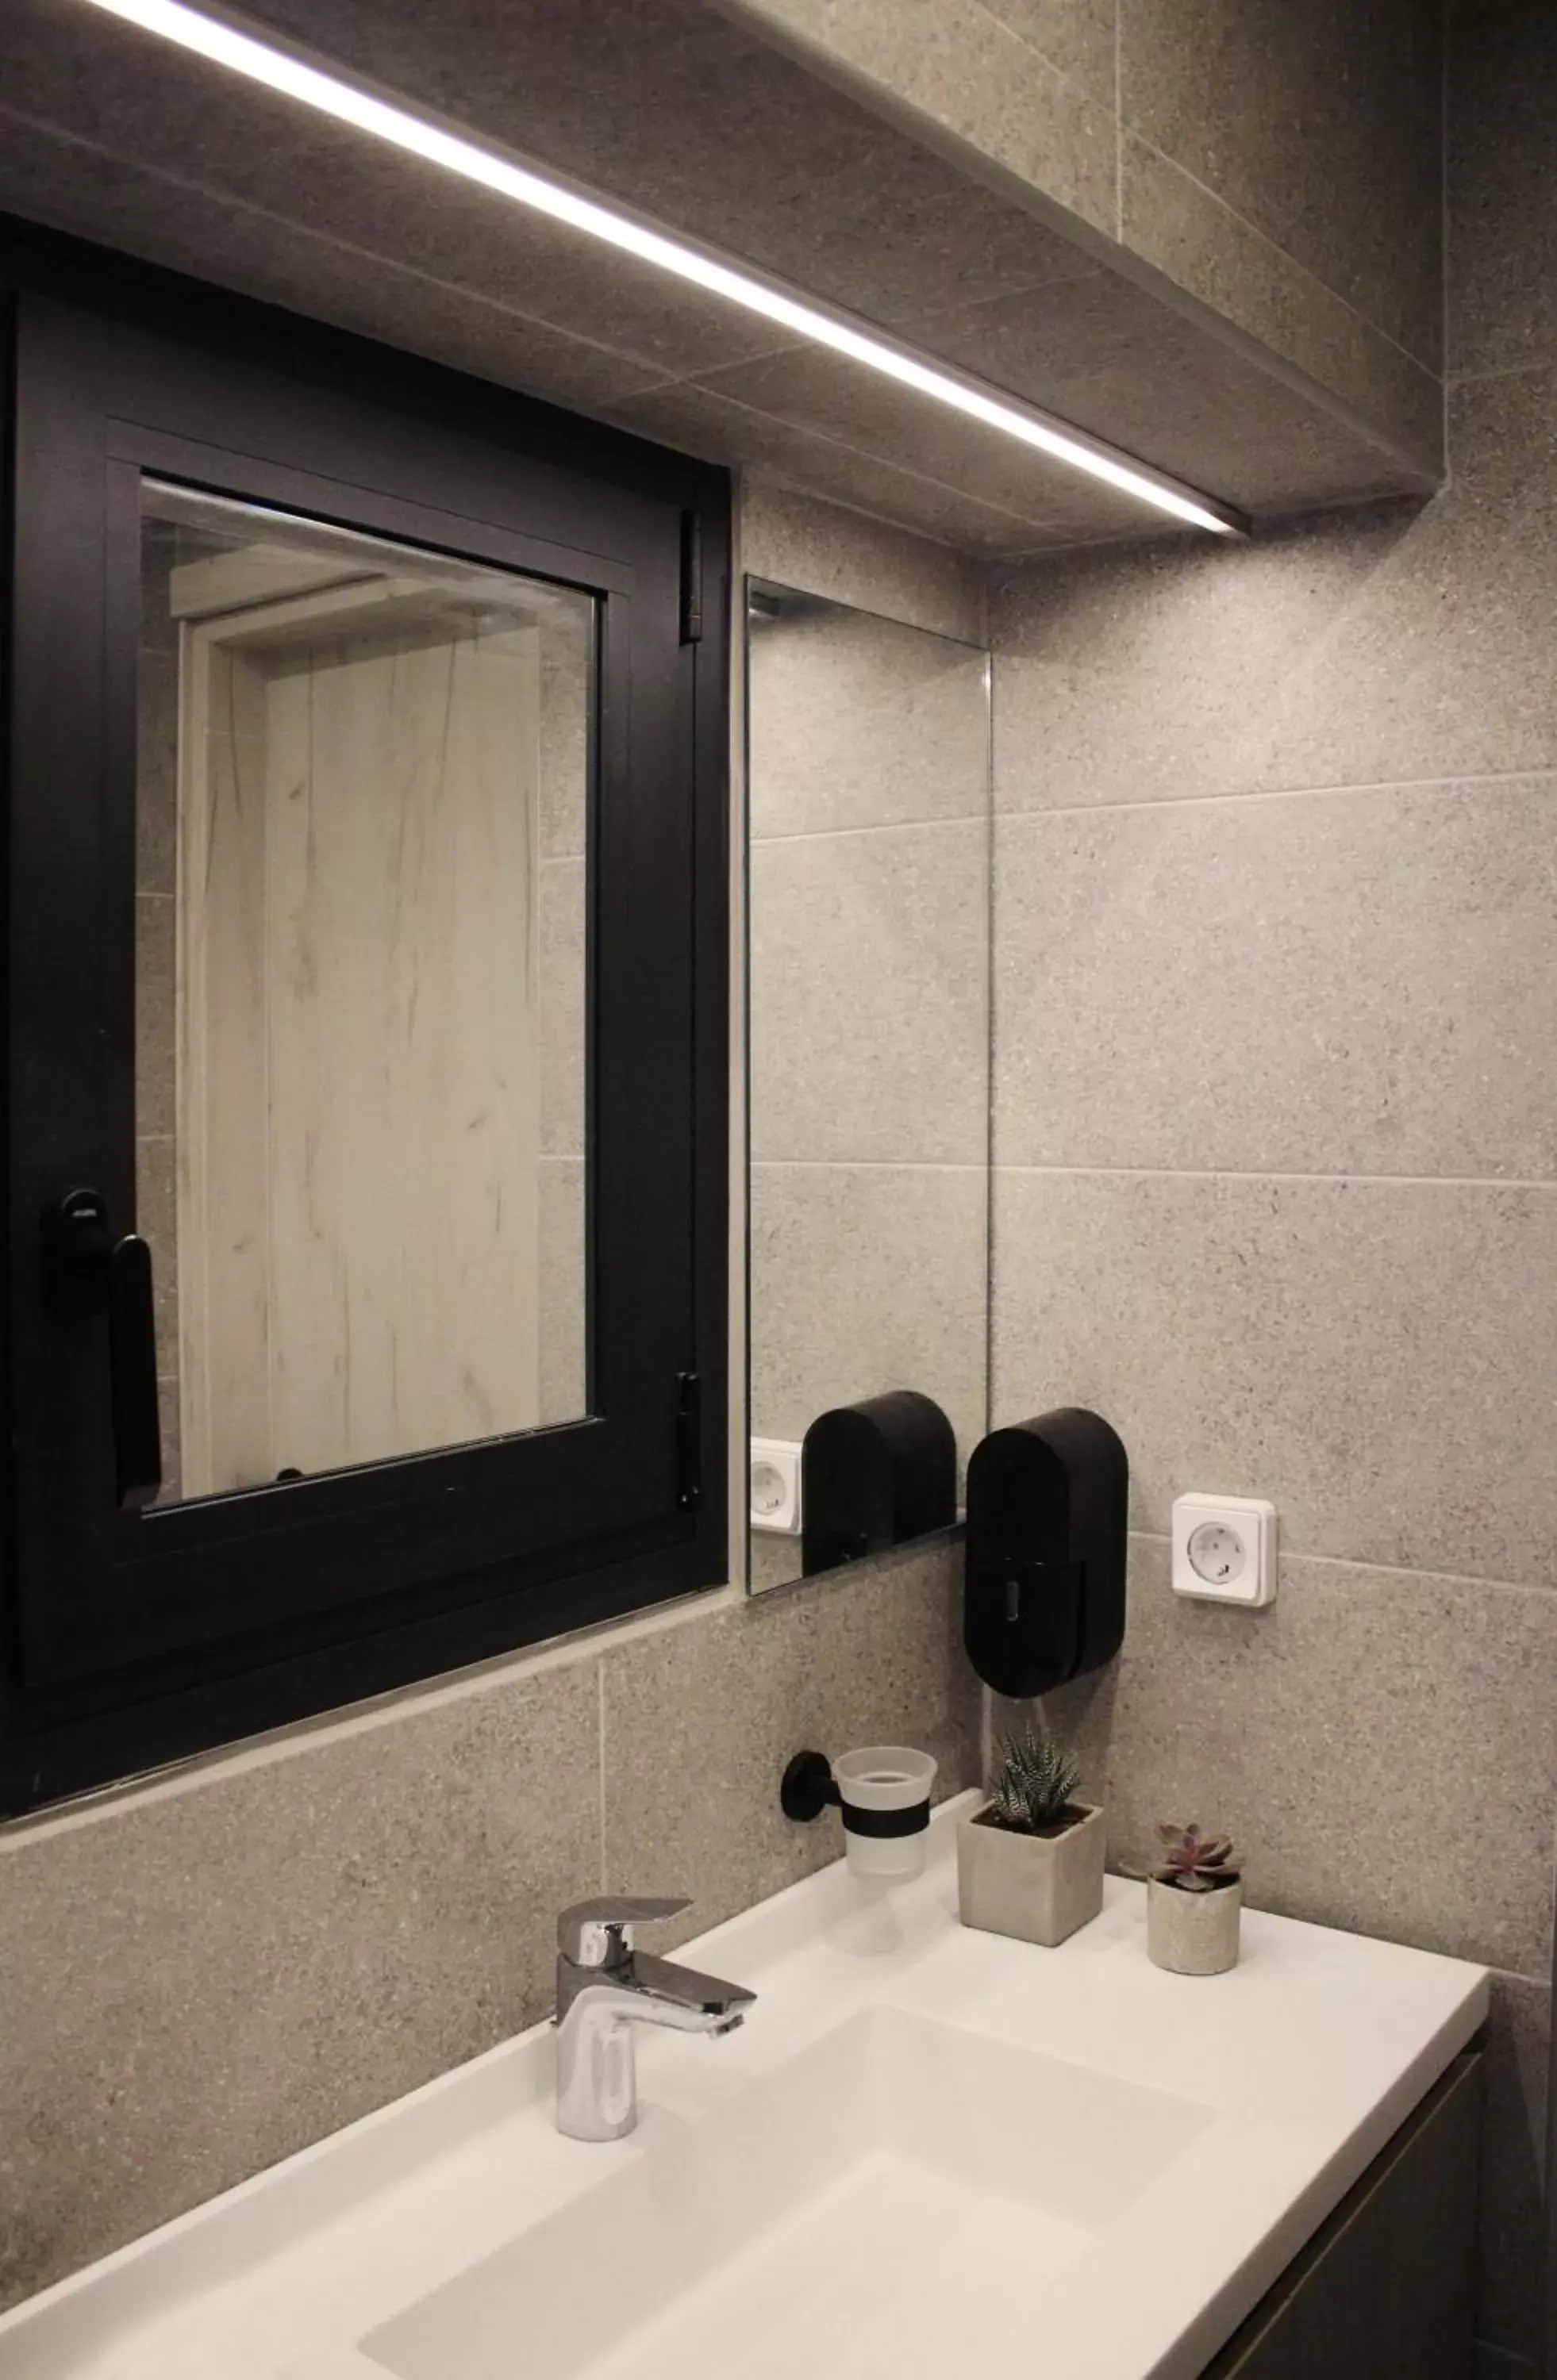 Bathroom in Exarchia House Project